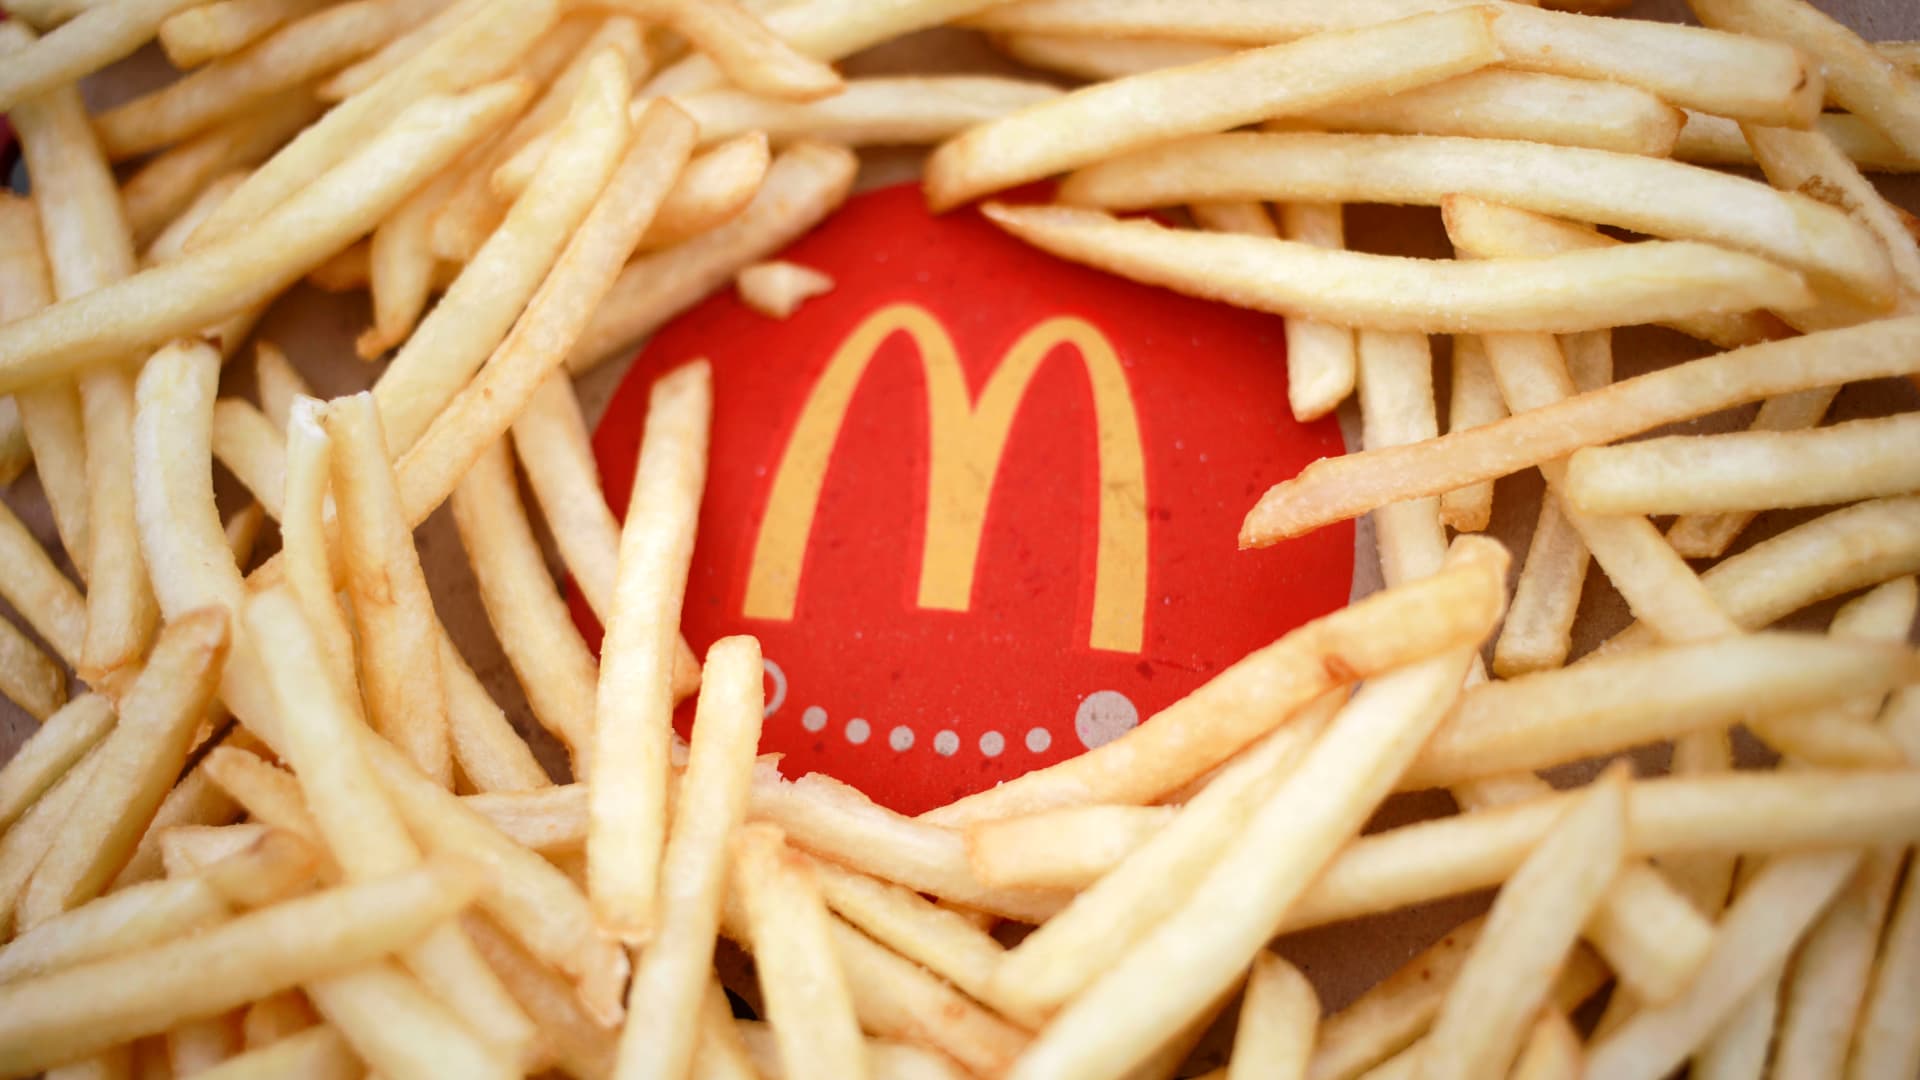 McDonald’s investor day: What to expect